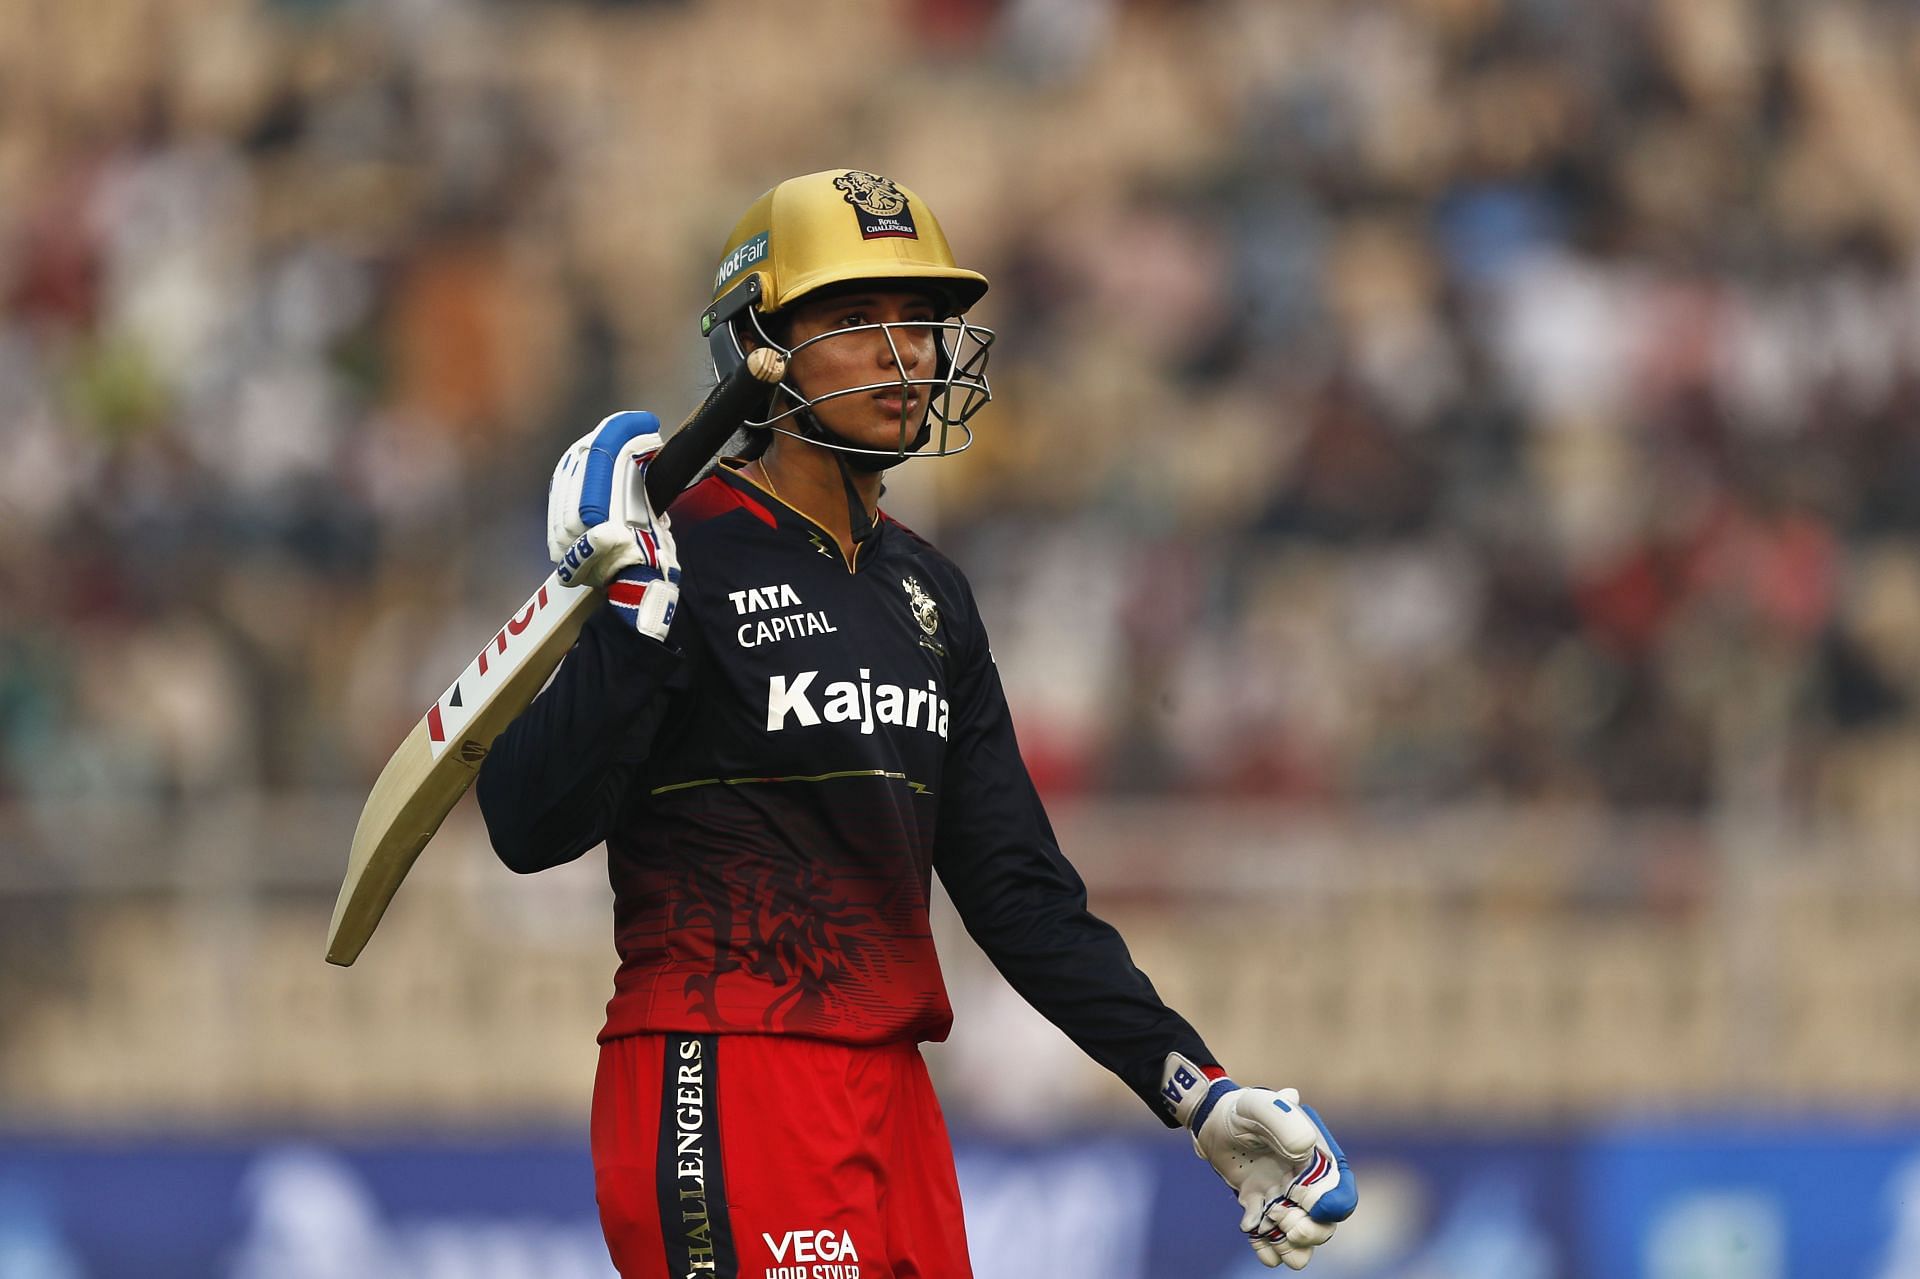 Can Smriti Mandhana turn it around for her team in the second edition?